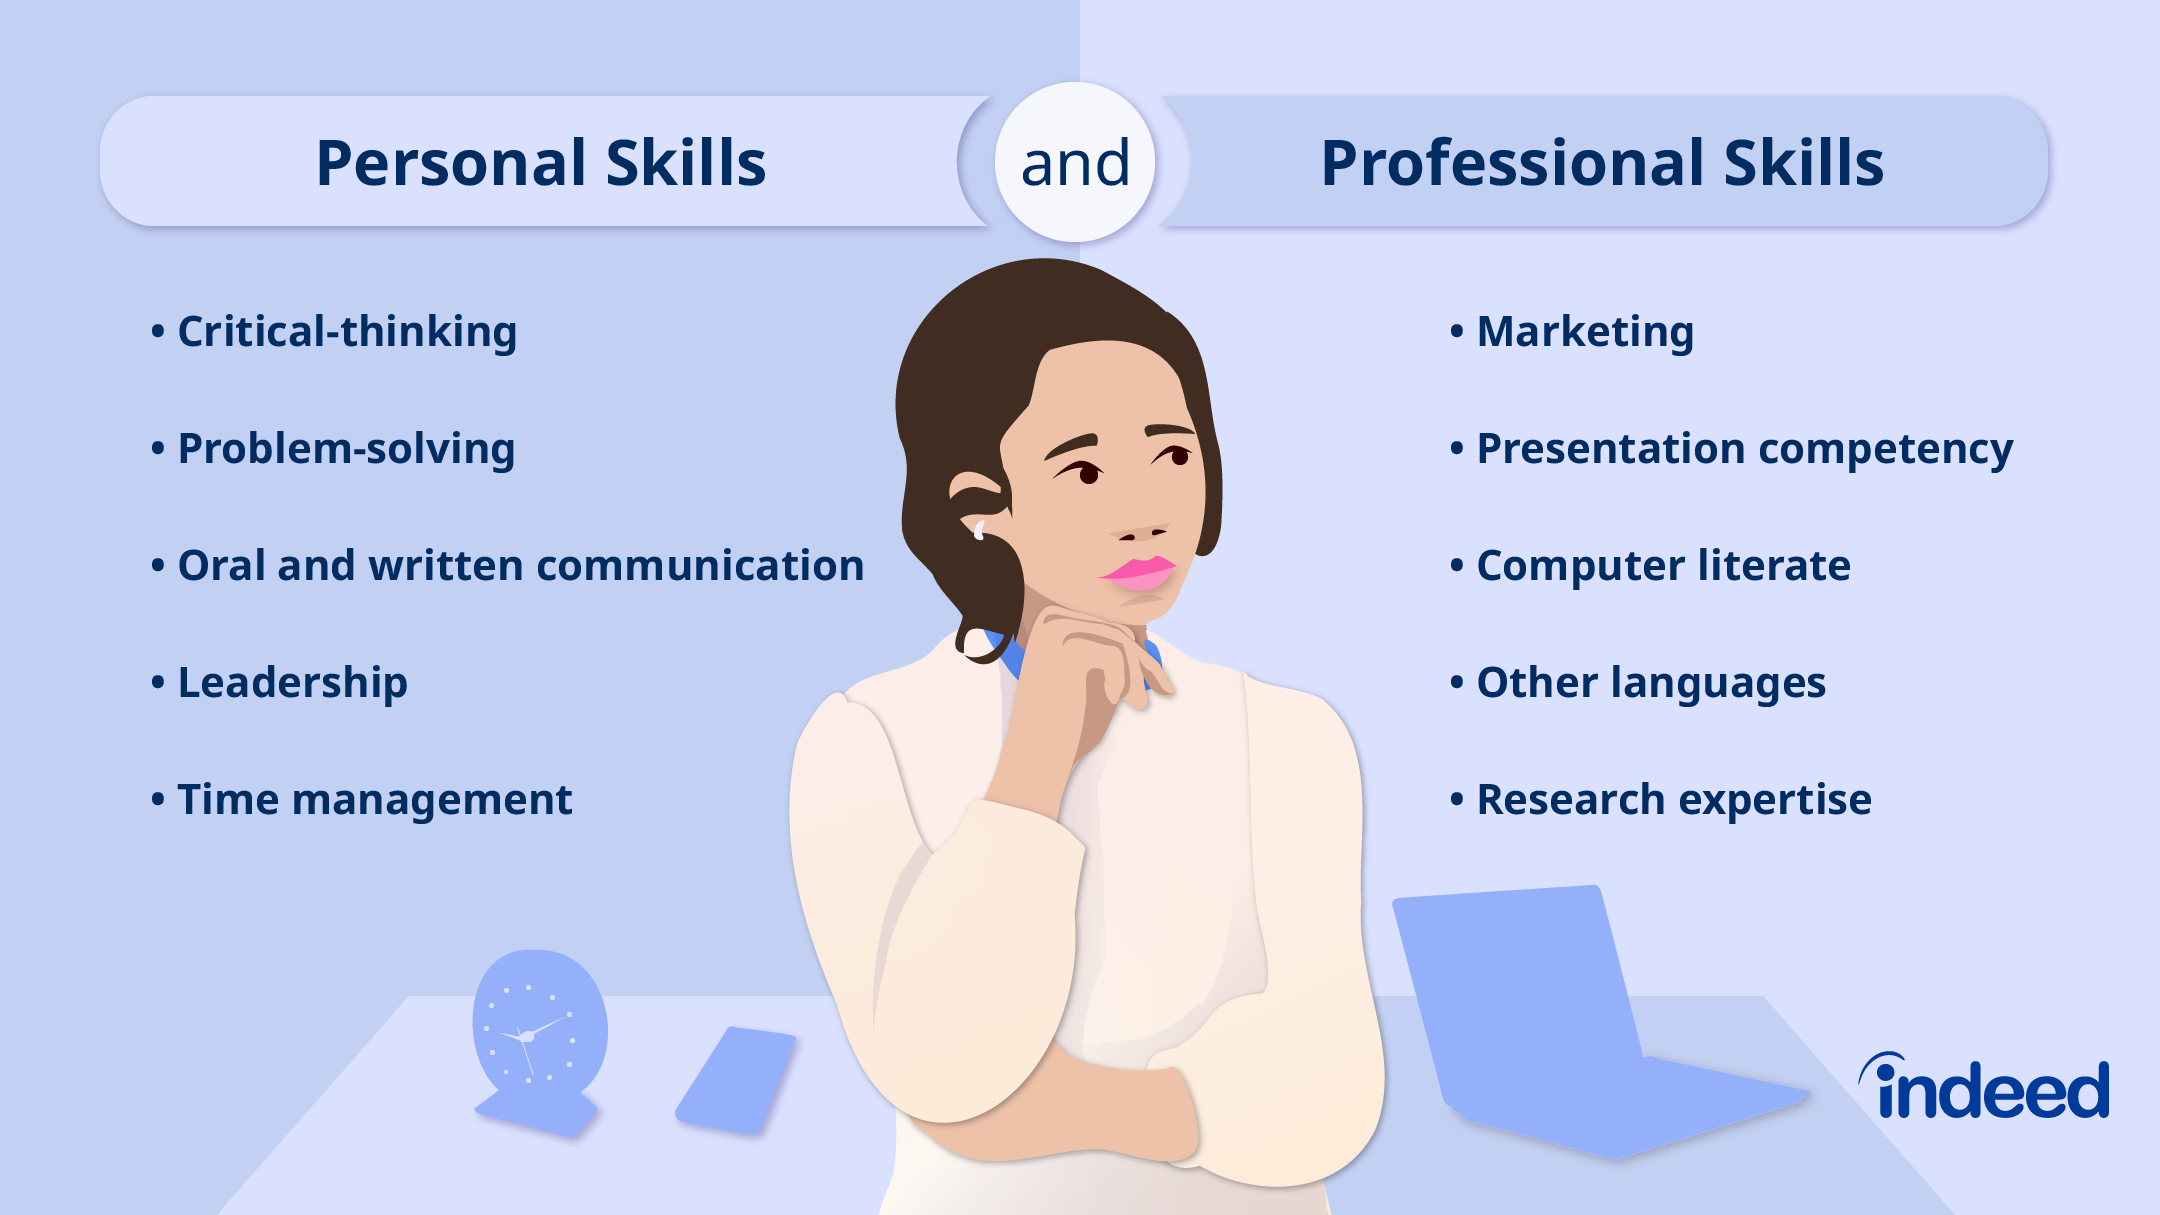 good skills to put on your personal statement